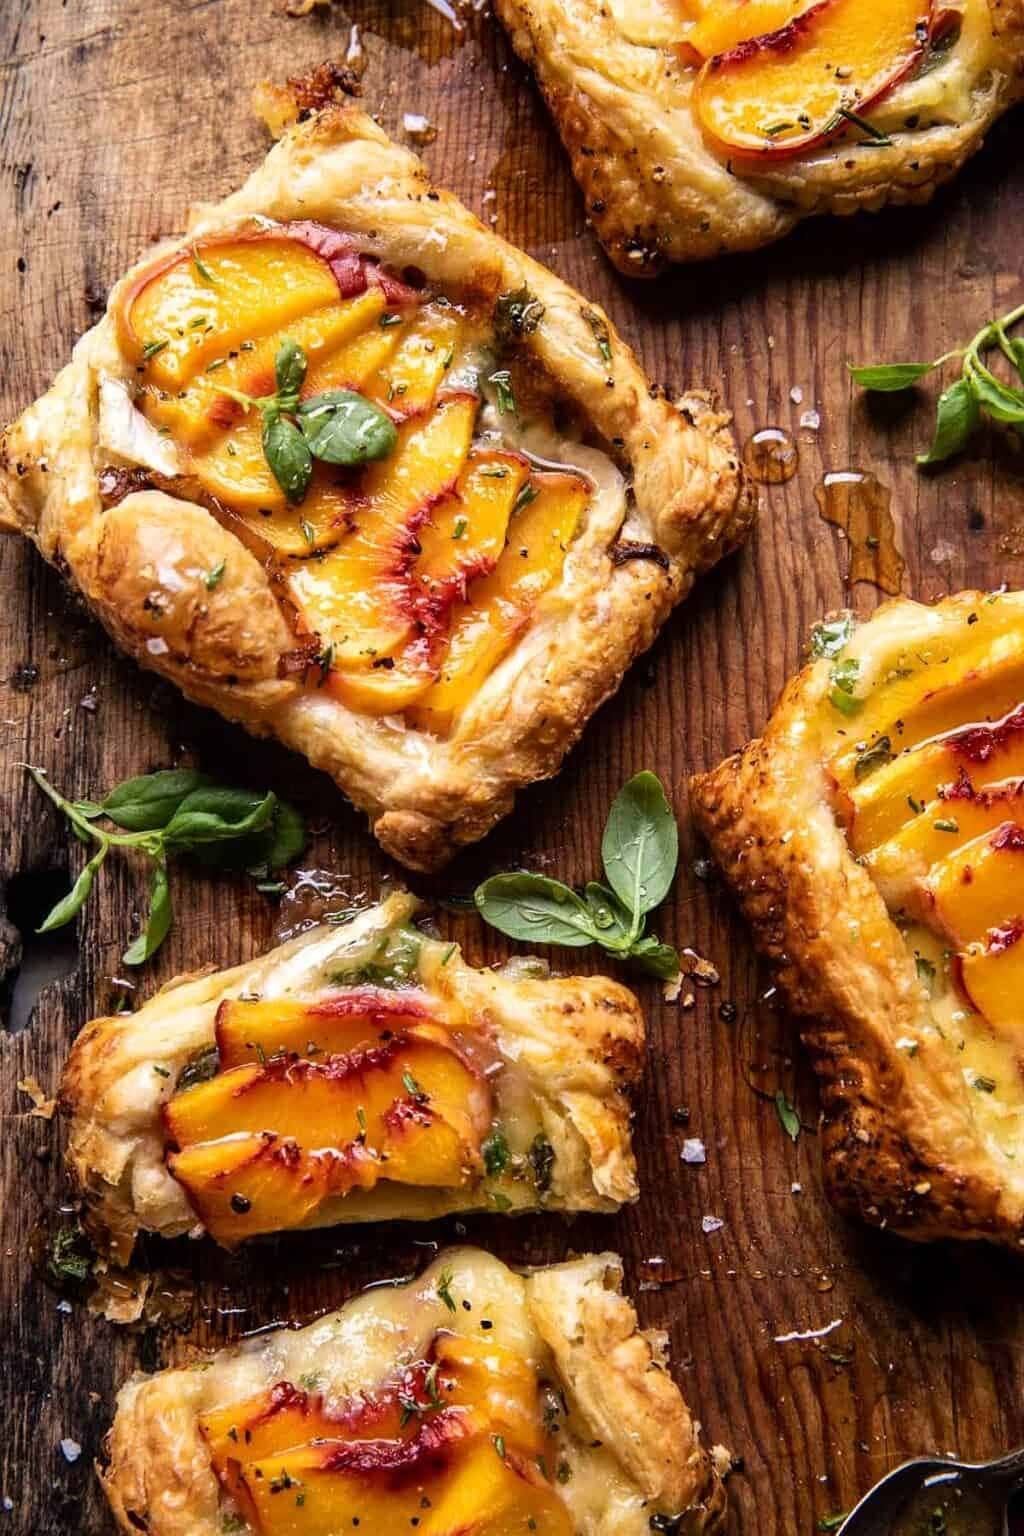 Peach brie pastry tarts with peppered rosemary honey on a wooden board.